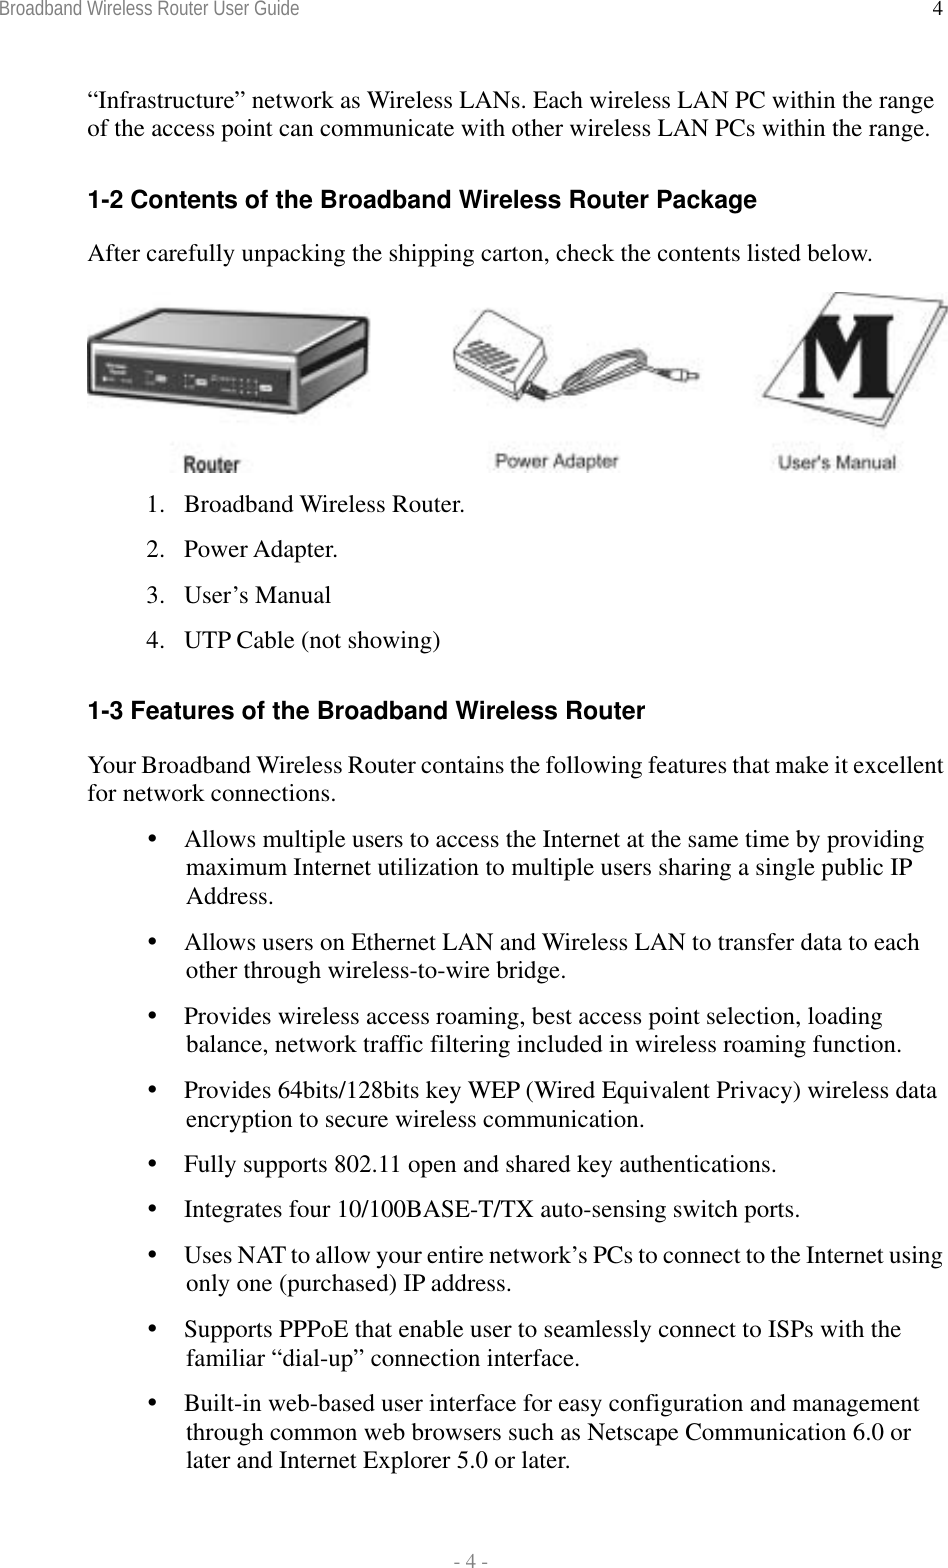 Broadband Wireless Router User Guide  - 4 - 4“Infrastructure” network as Wireless LANs. Each wireless LAN PC within the range of the access point can communicate with other wireless LAN PCs within the range.  1-2 Contents of the Broadband Wireless Router Package After carefully unpacking the shipping carton, check the contents listed below.   1. Broadband Wireless Router. 2. Power Adapter. 3. User’s Manual 4.  UTP Cable (not showing)  1-3 Features of the Broadband Wireless Router Your Broadband Wireless Router contains the following features that make it excellent for network connections.  Allows multiple users to access the Internet at the same time by providing maximum Internet utilization to multiple users sharing a single public IP Address.  Allows users on Ethernet LAN and Wireless LAN to transfer data to each other through wireless-to-wire bridge.  Provides wireless access roaming, best access point selection, loading balance, network traffic filtering included in wireless roaming function.  Provides 64bits/128bits key WEP (Wired Equivalent Privacy) wireless data encryption to secure wireless communication.  Fully supports 802.11 open and shared key authentications.  Integrates four 10/100BASE-T/TX auto-sensing switch ports.  Uses NAT to allow your entire network’s PCs to connect to the Internet using only one (purchased) IP address.  Supports PPPoE that enable user to seamlessly connect to ISPs with the familiar “dial-up” connection interface.  Built-in web-based user interface for easy configuration and management through common web browsers such as Netscape Communication 6.0 or later and Internet Explorer 5.0 or later. 